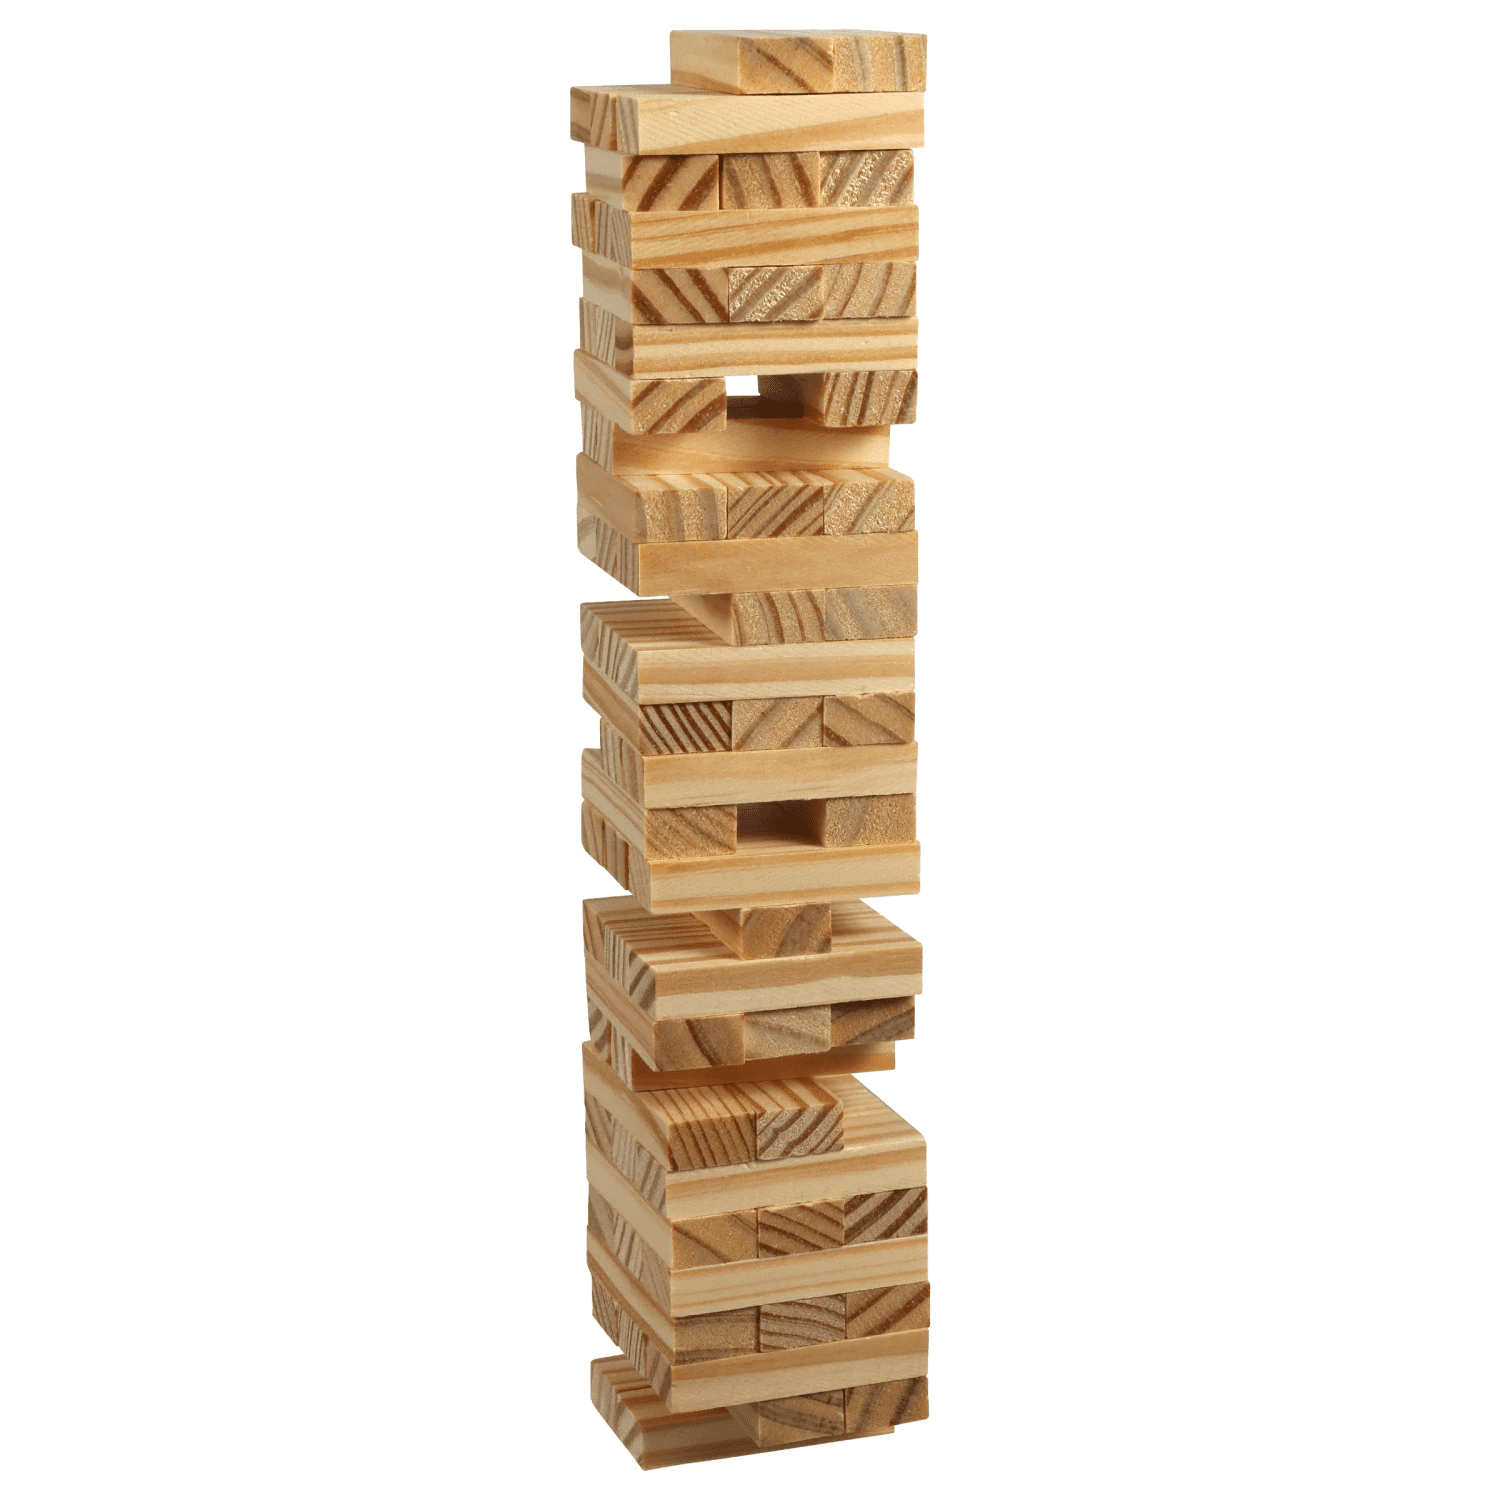 Wooden Tumbling Stacking Tower 48 PIECE 